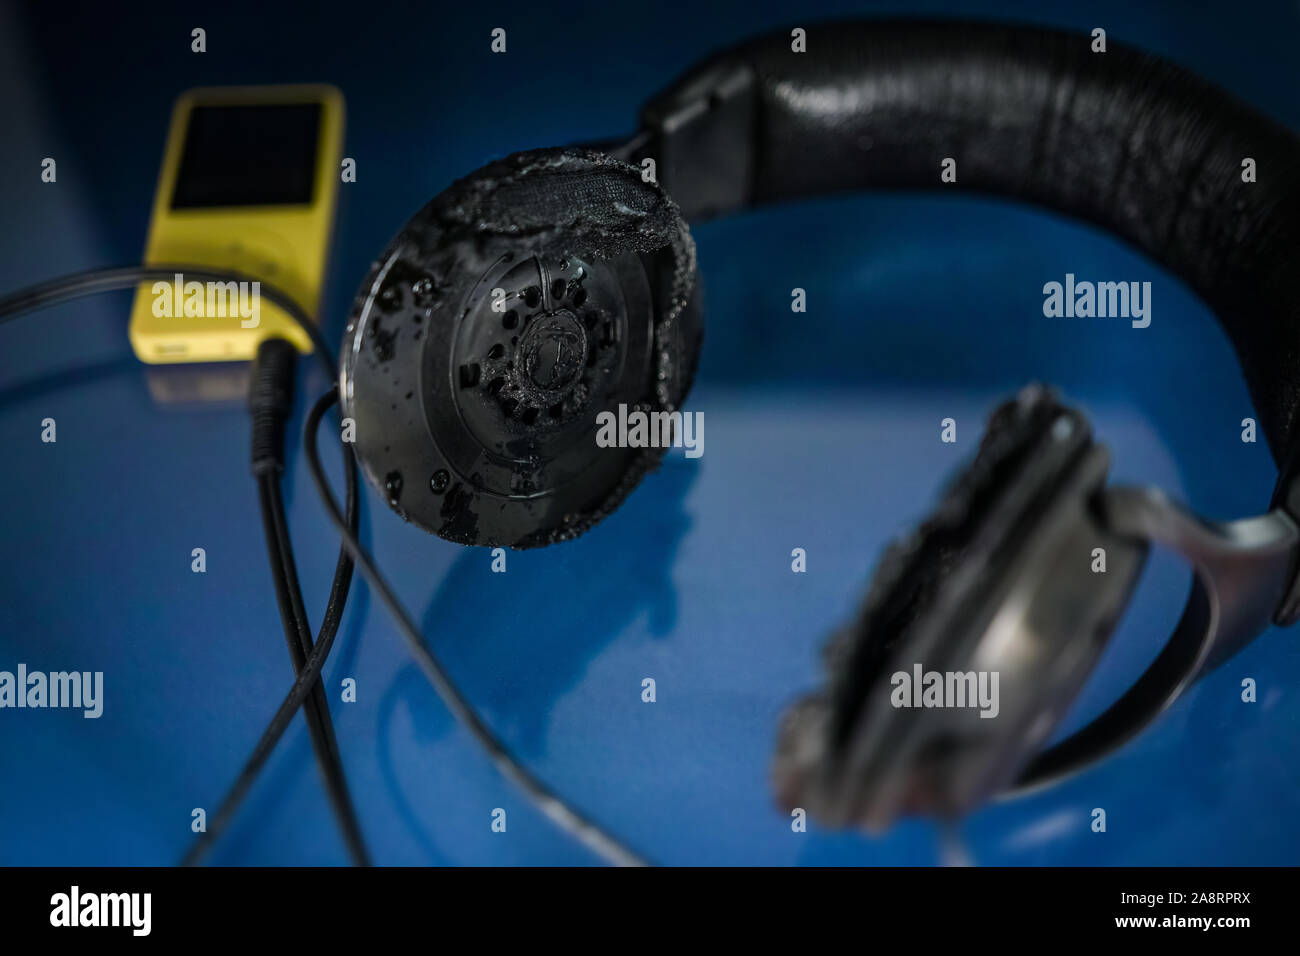 Too loud: burned headphones attached to a personal music player. Low key  Stock Photo - Alamy